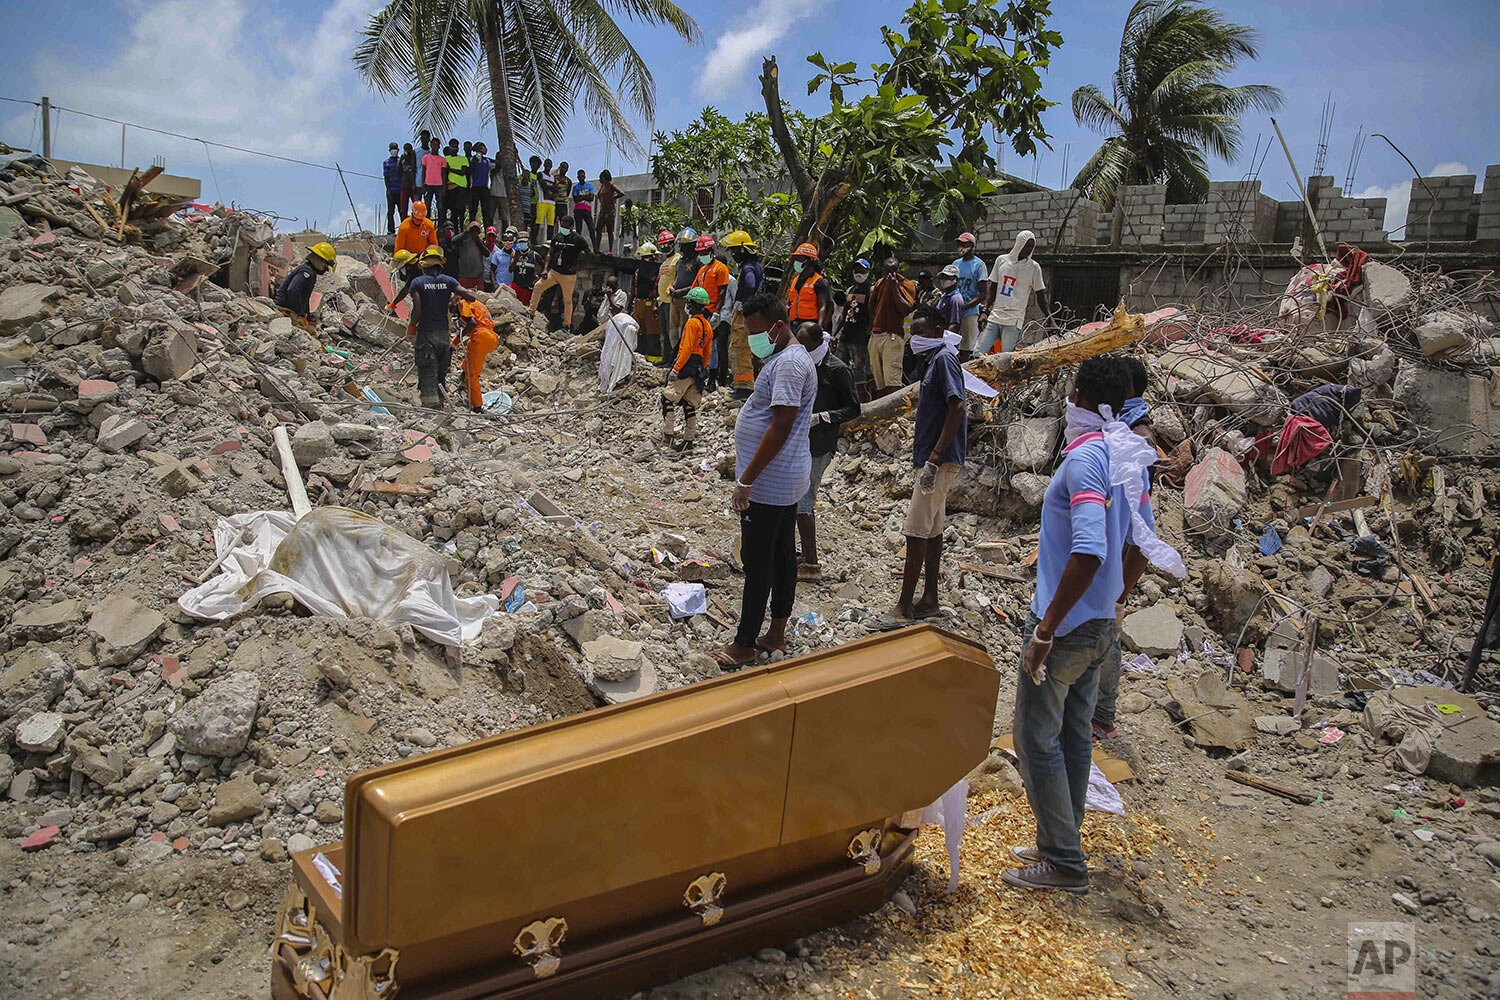  People stand next to an empty coffin near the sheet-covered remains of Francois Elmay whose body was recovered from the rubble of a home destroyed by the 7.2-magnitude earthquake in Les Cayes, Haiti, Aug. 18, 2021. (AP Photo/Joseph Odelyn) 